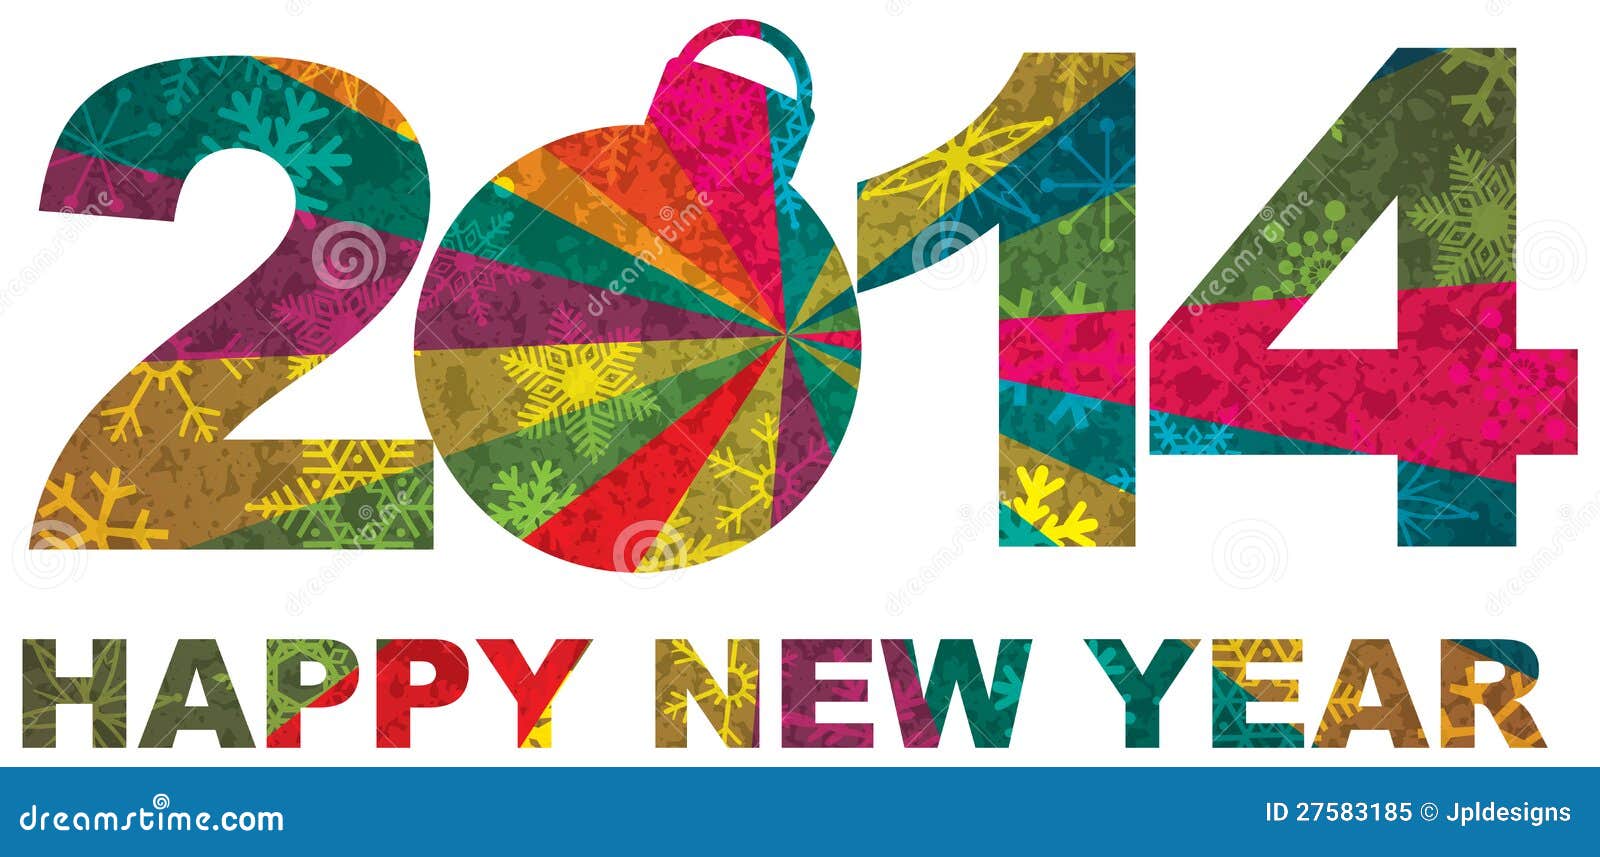 new year 2014 clipart images - photo #12